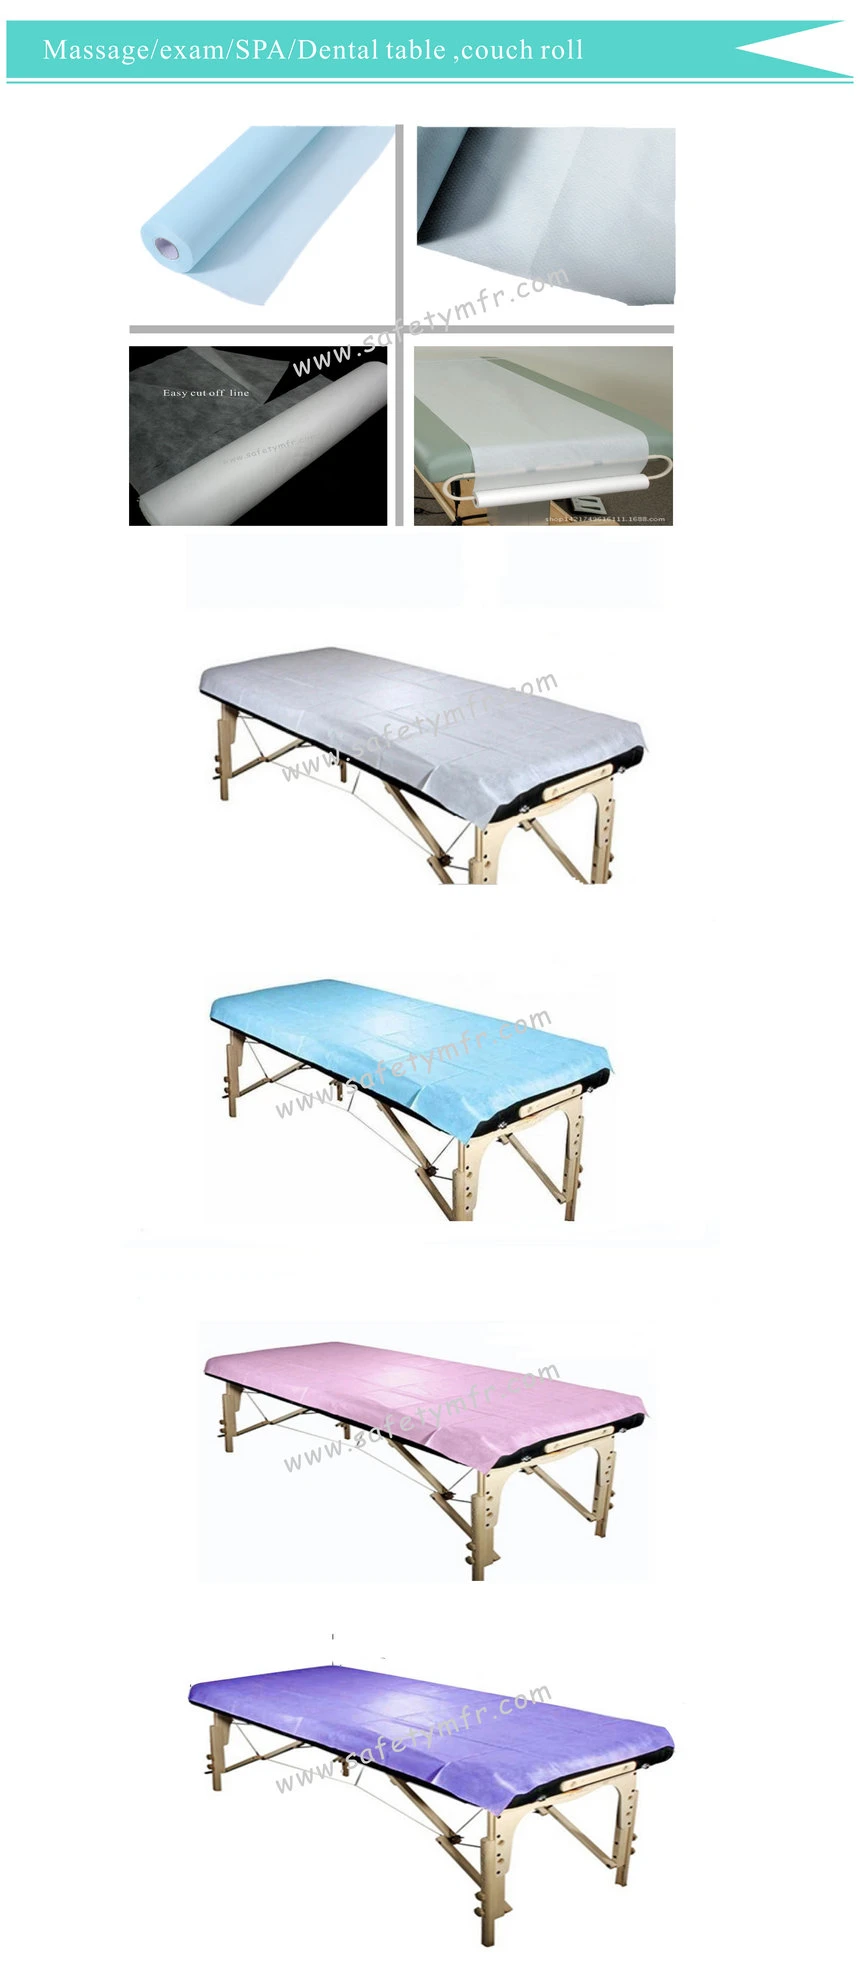 SPA/Salon/Hospital/dental/clinic/Exam Table PE coated Perforated Nonwoven Bedsheet Roll, PaperDisposable bedsheet Roll